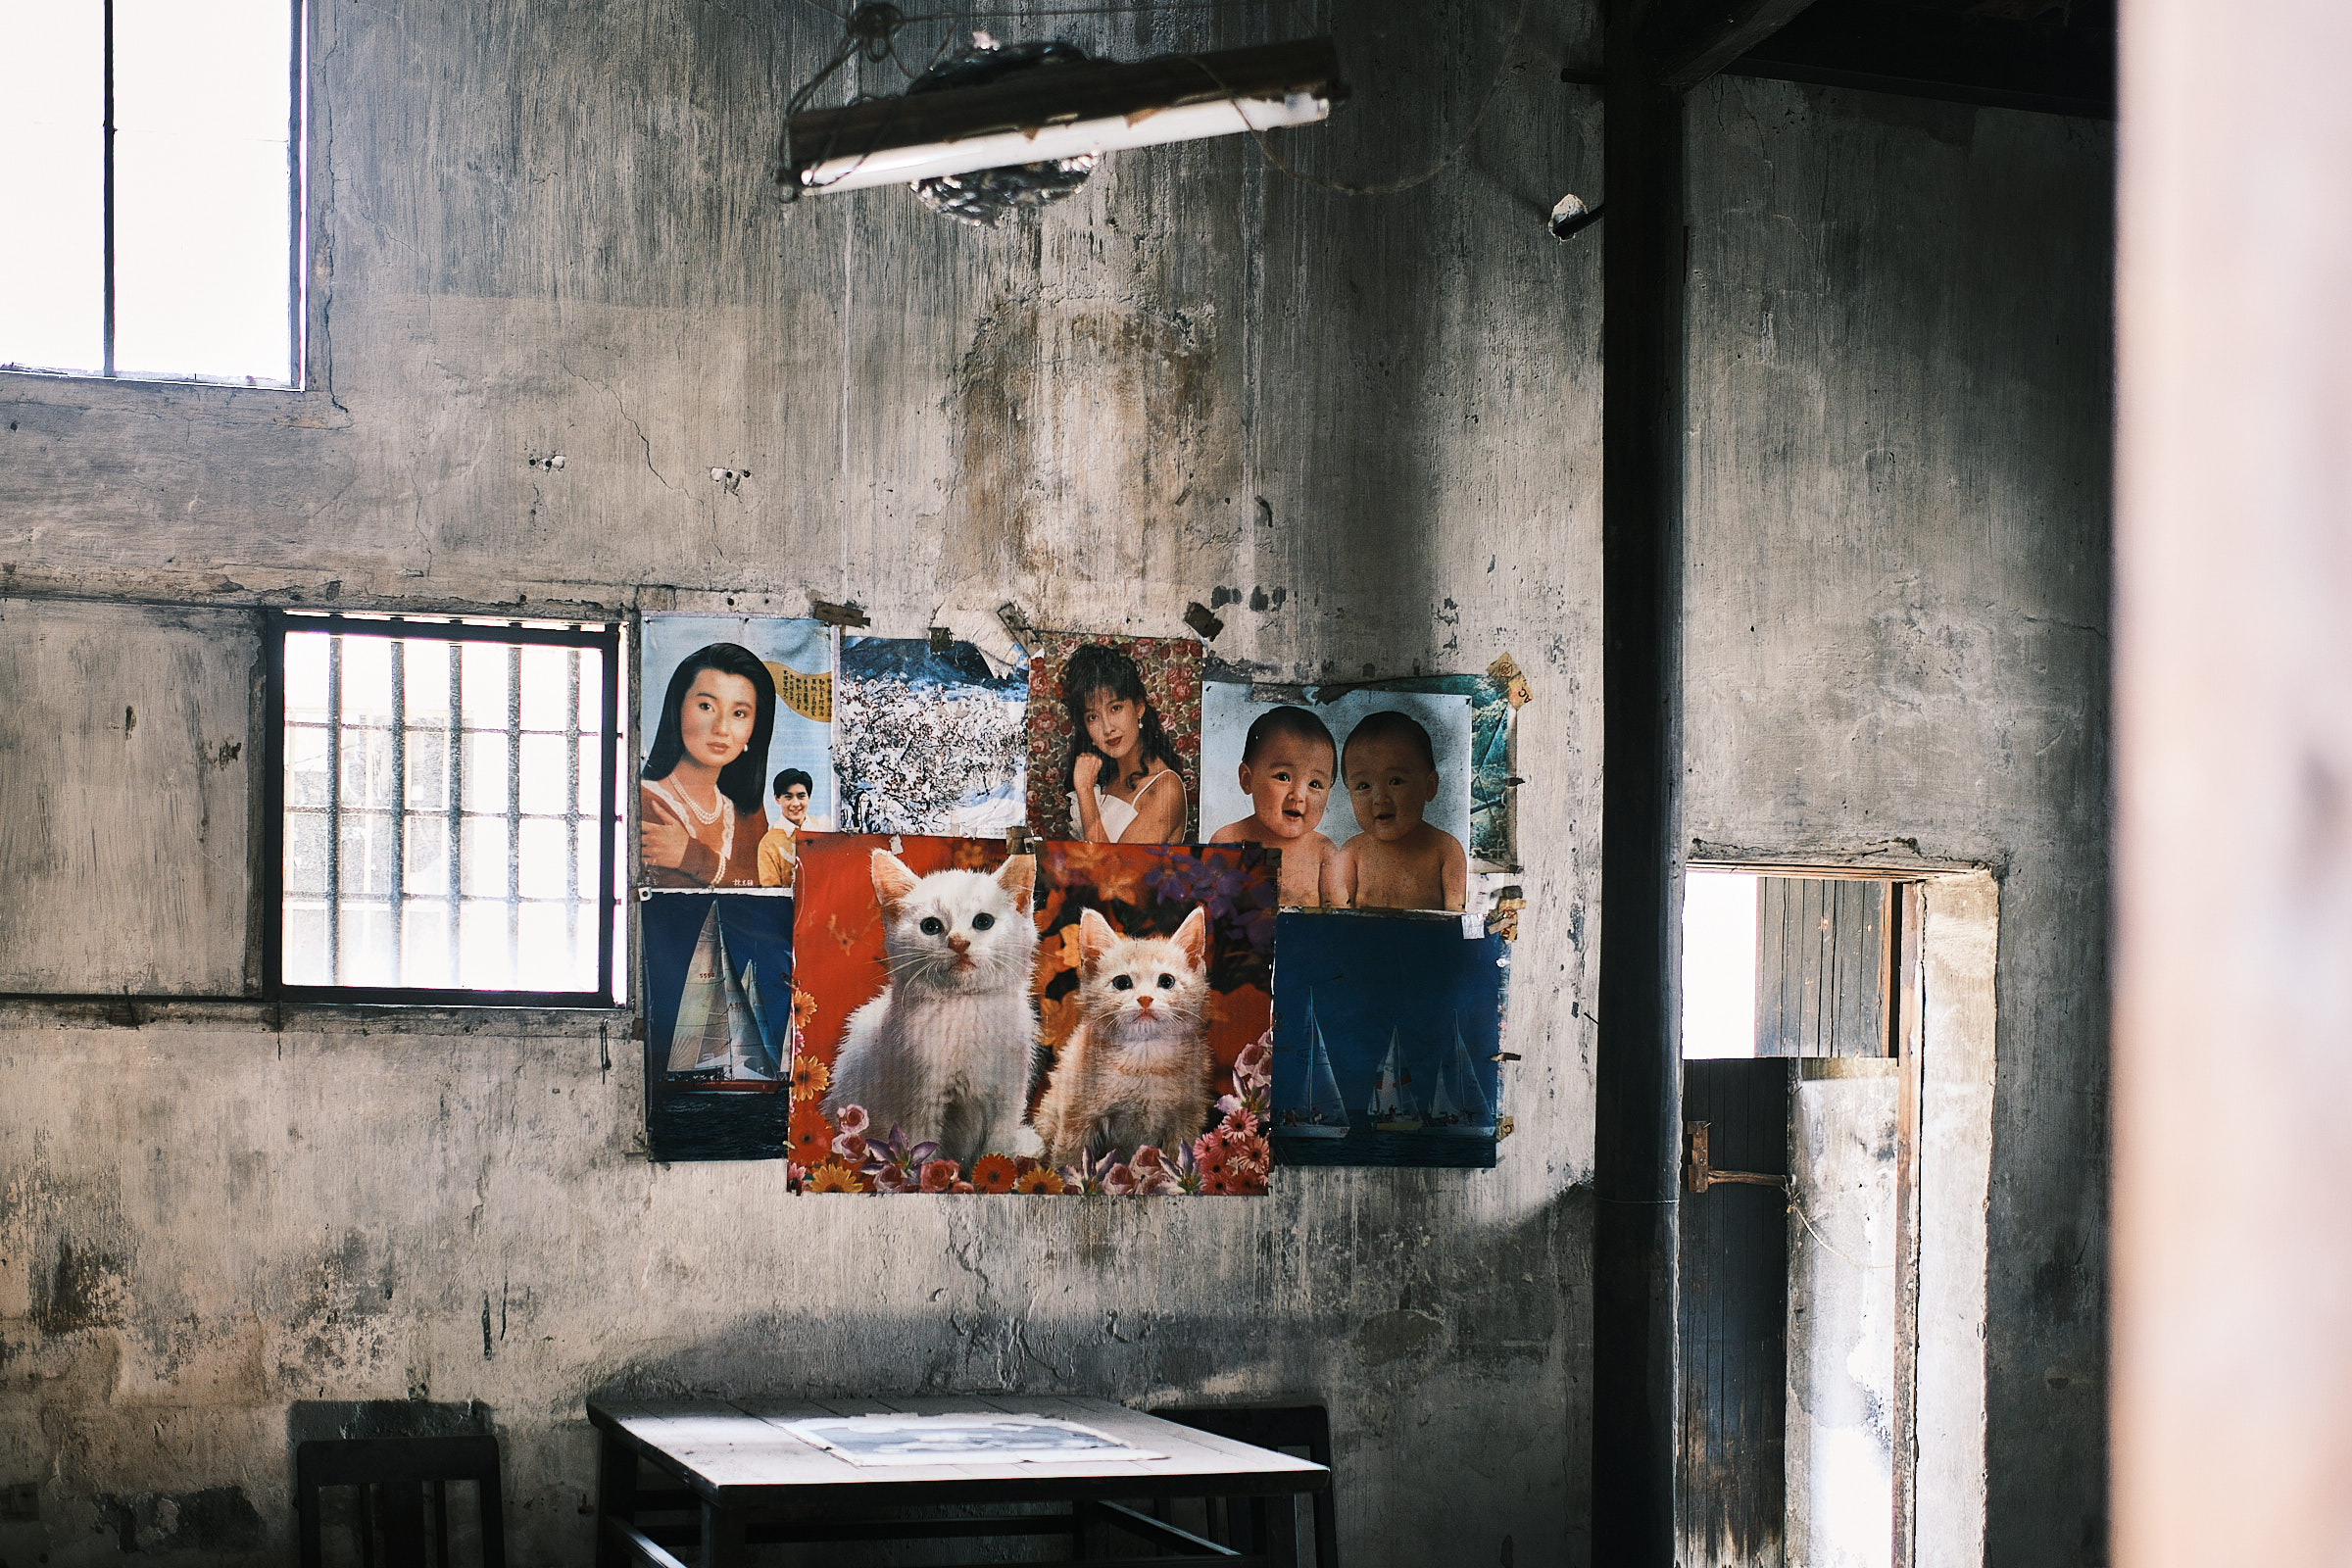 Interesting Wall With Posters Of Actresses And Cats